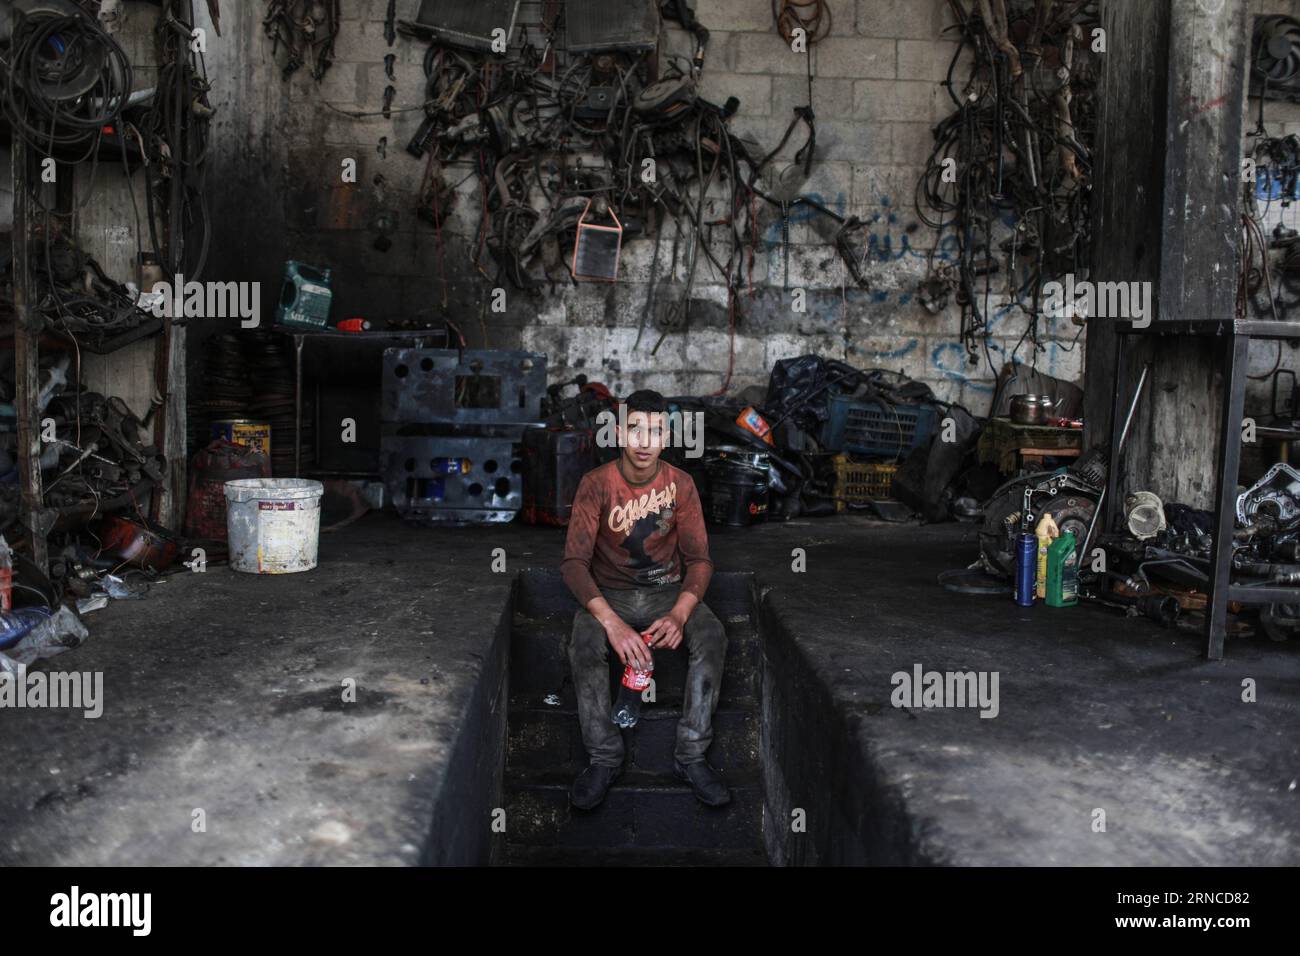 (160405) -- GAZA, April 5, 2016 -- Palestinian boy Debes Talateni, 13, who works as mechanic to help his father support their family, sits at a garage in Gaza City on April 5, 2016. Many Palestinian young boys are trying to make a living and support their family. ) MIDEAST-GAZA-PALESTINIAN-CHILD WissamxNassar PUBLICATIONxNOTxINxCHN   Gaza April 5 2016 PALESTINIAN Boy Debes  13 Who Works As Mechanic to Help His Father Support their Family sits AT a Garage in Gaza City ON April 5 2016 MANY PALESTINIAN Young Boys are trying to Make a Living and Support their Family Mideast Gaza PALESTINIAN Child Stock Photo